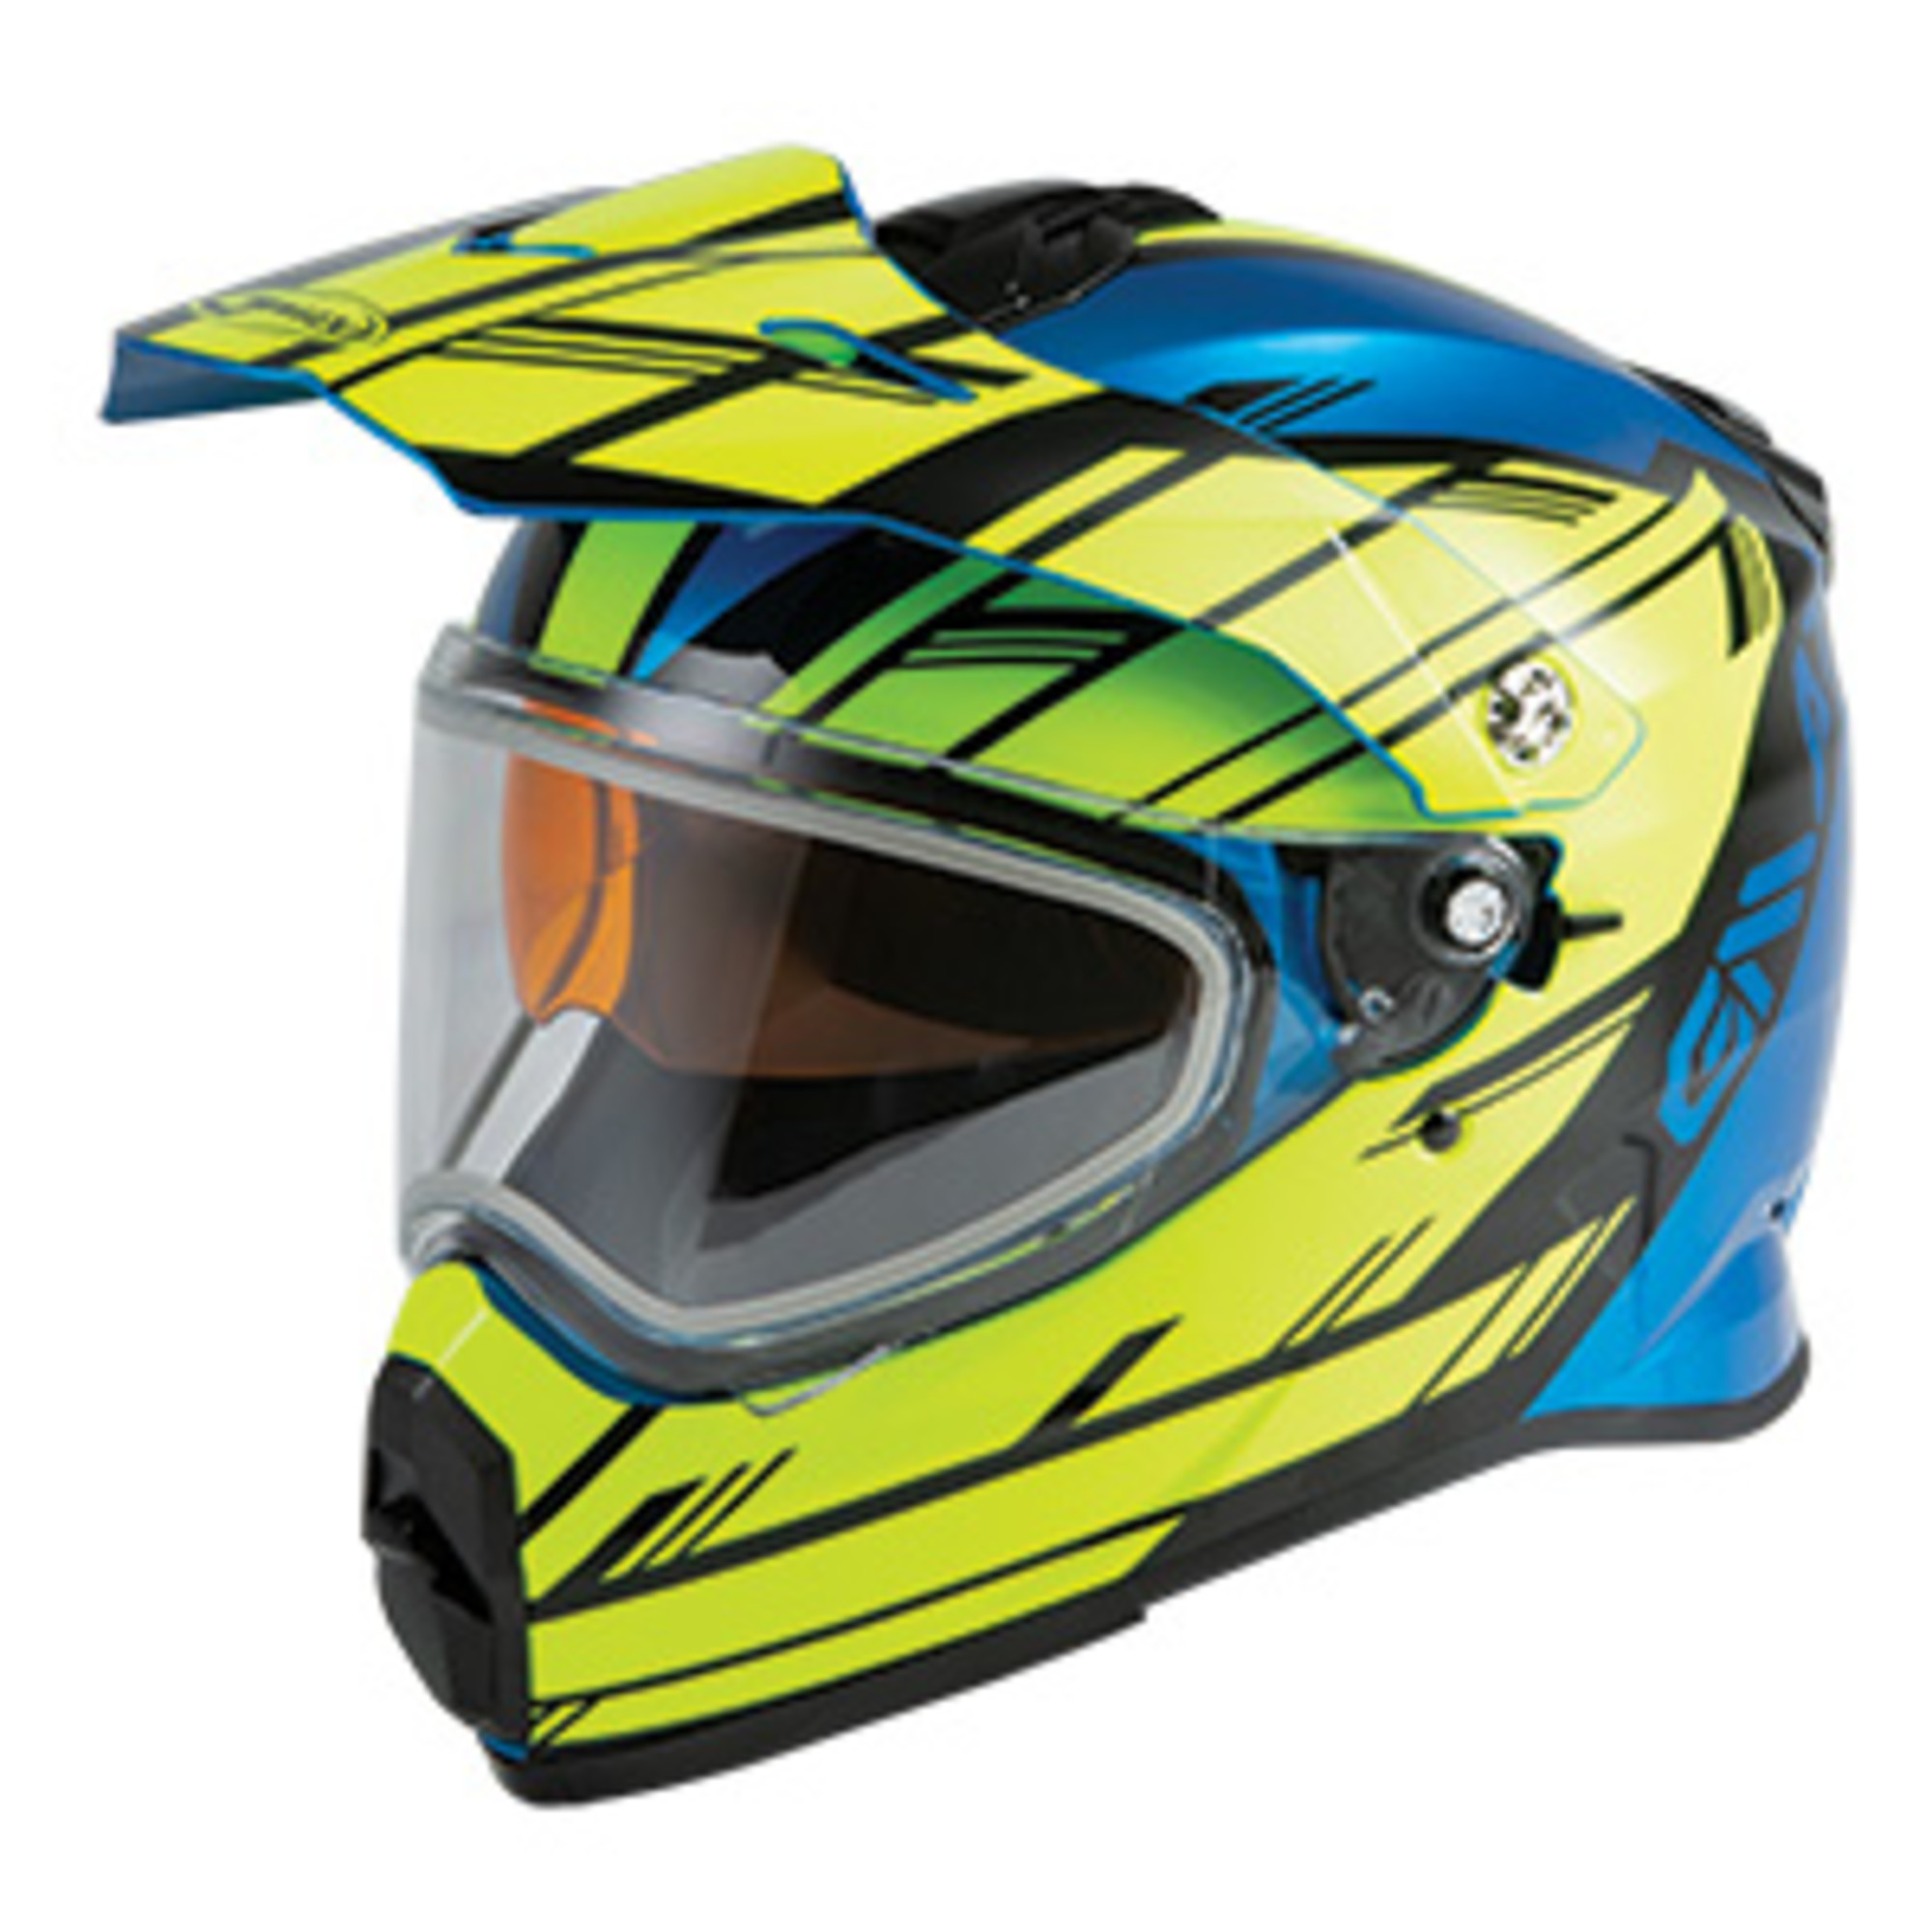 gmax dual shield full face helmets for kids at21 adventure touring